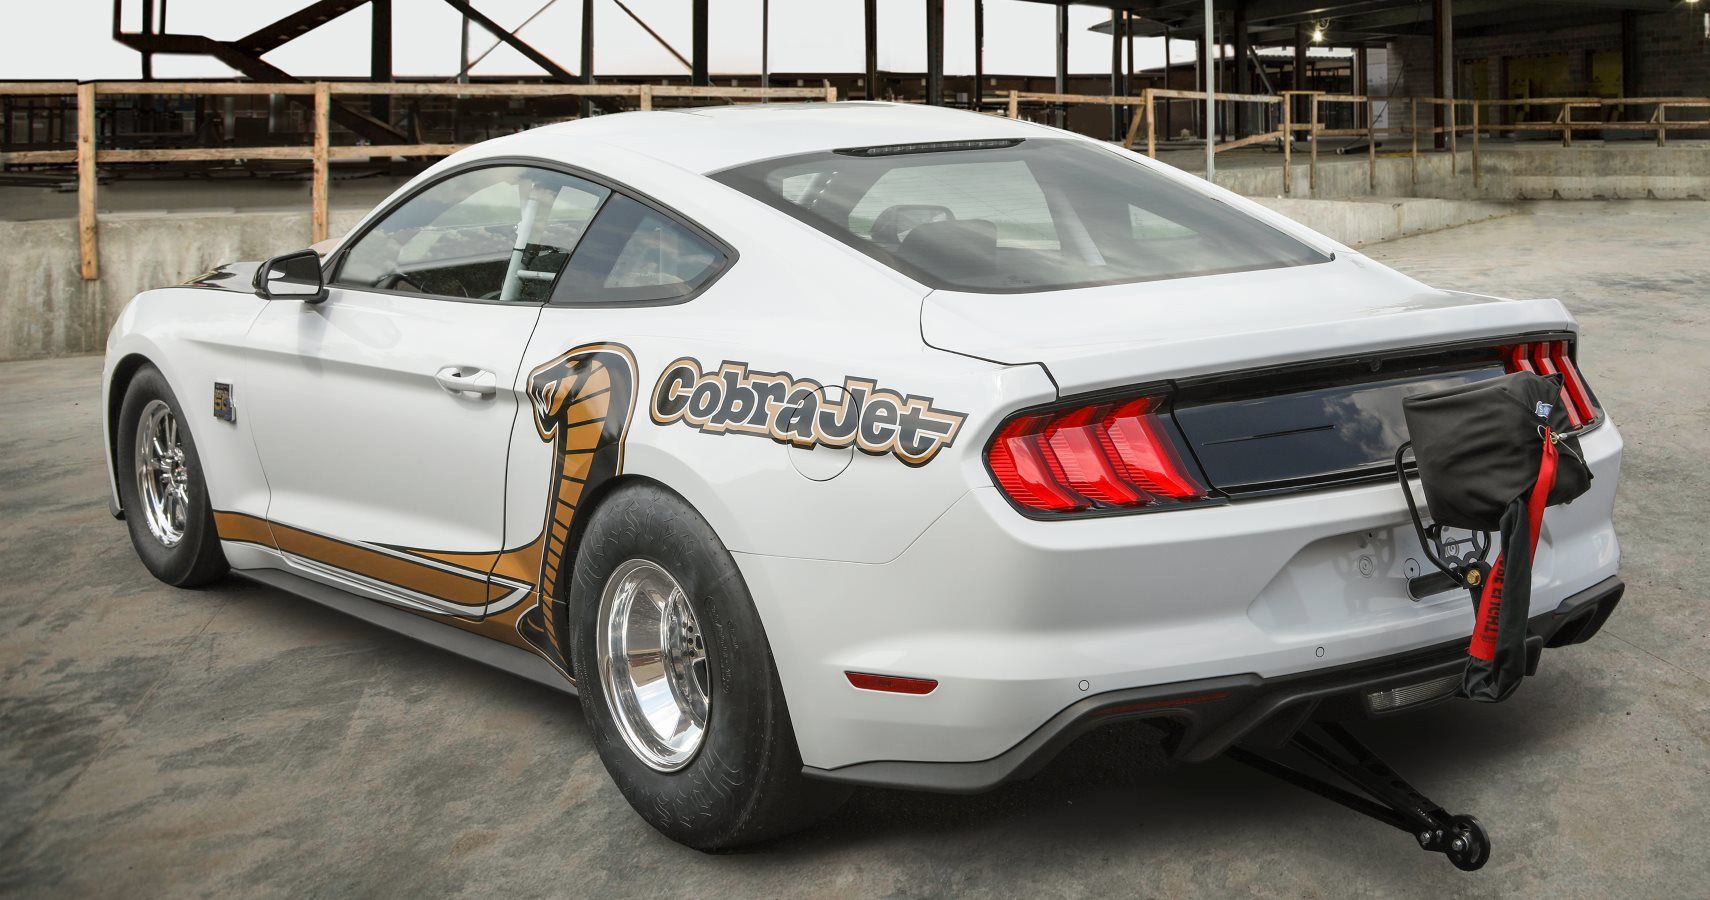 Ford's New Mustang Cobra Jet Is A Beast On The Drag Strip